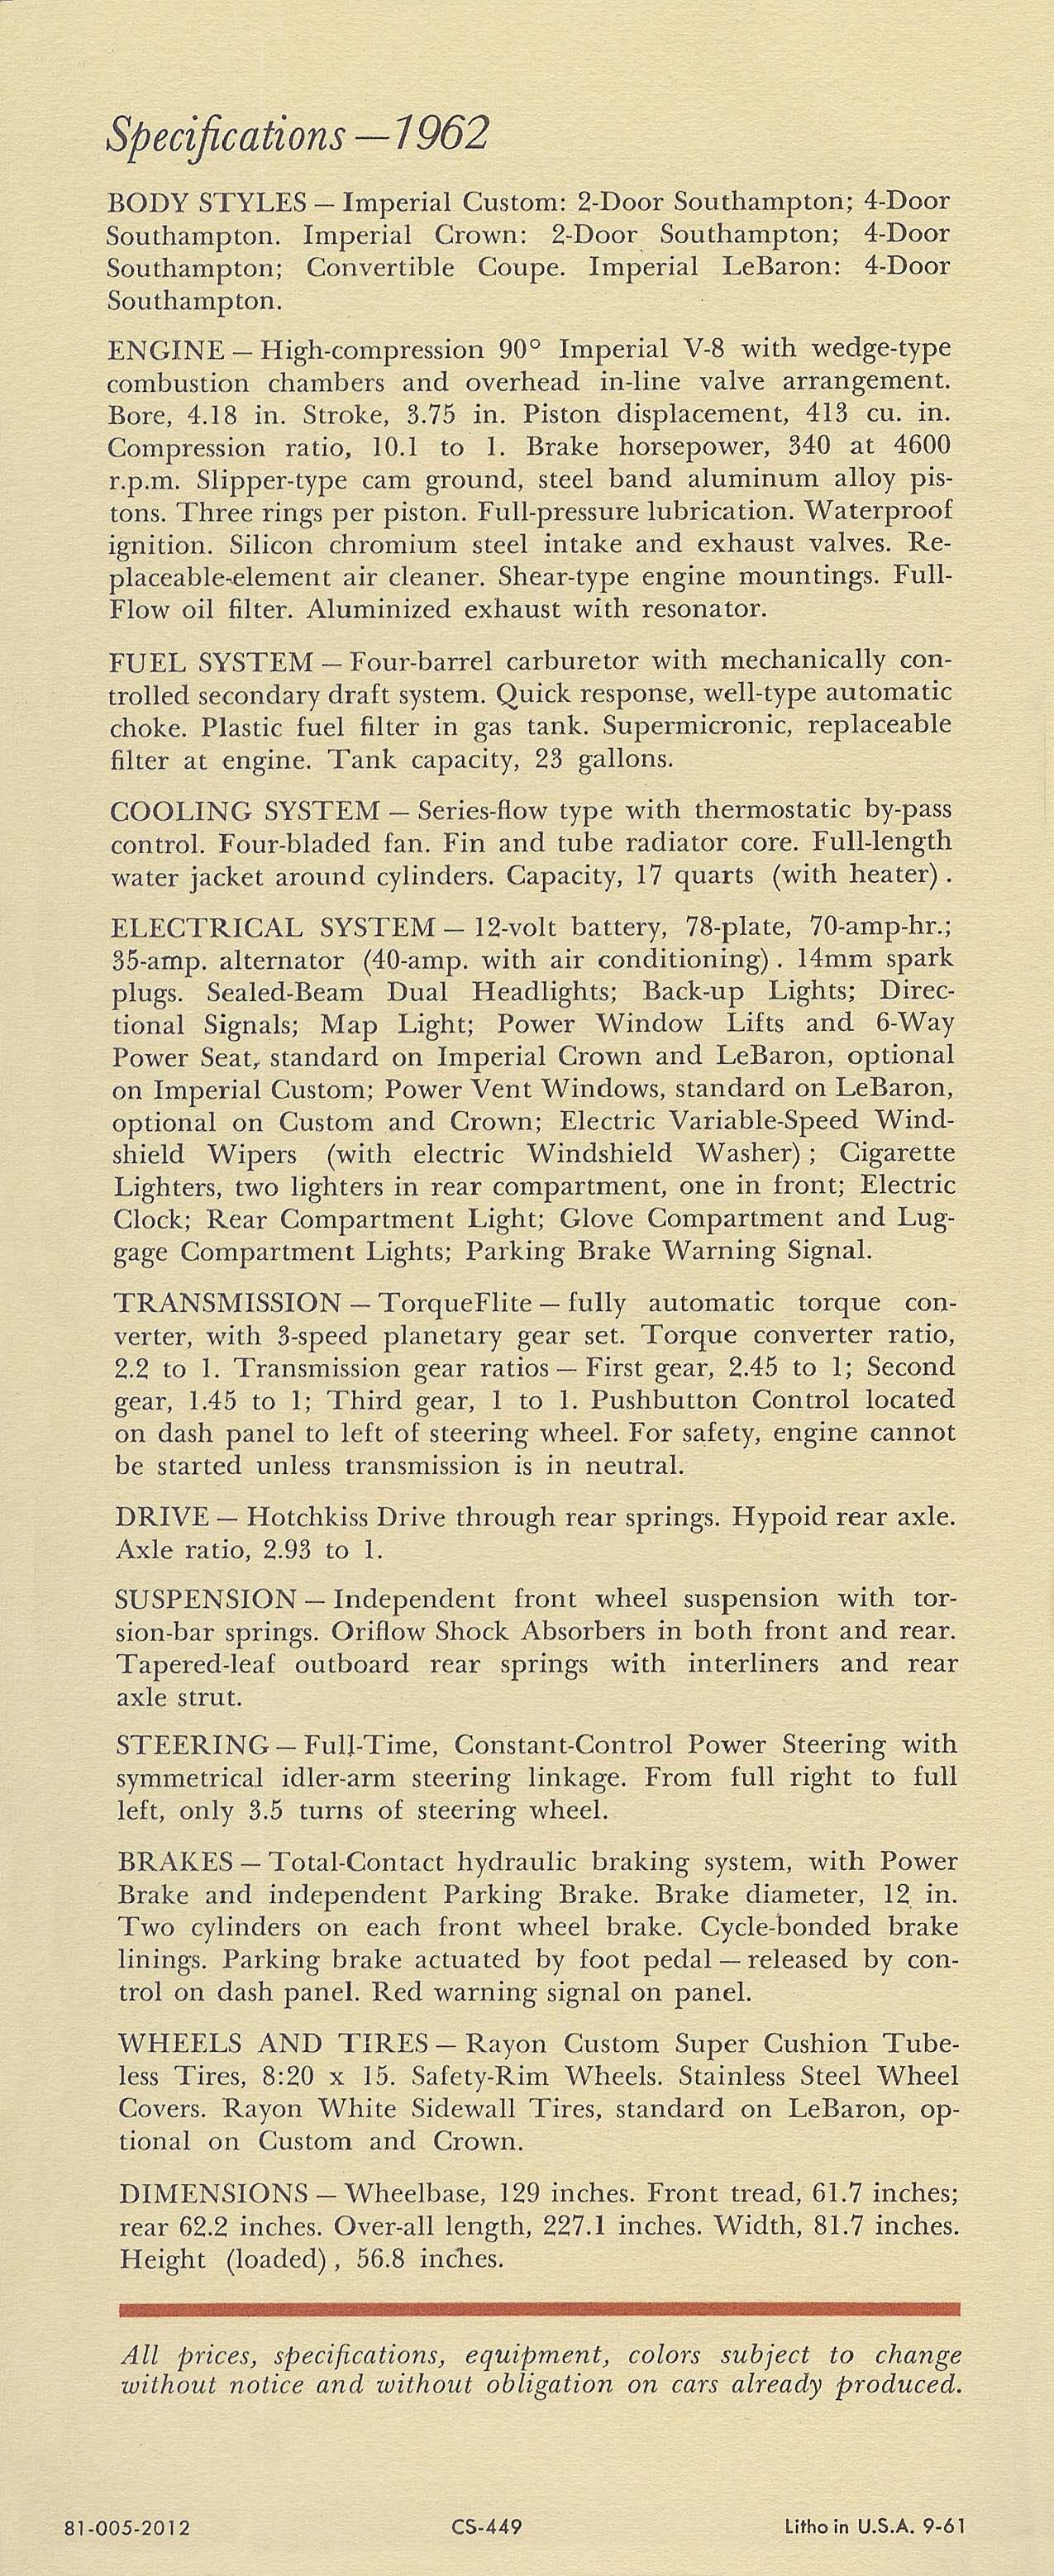 1962 Imperial Guide-12